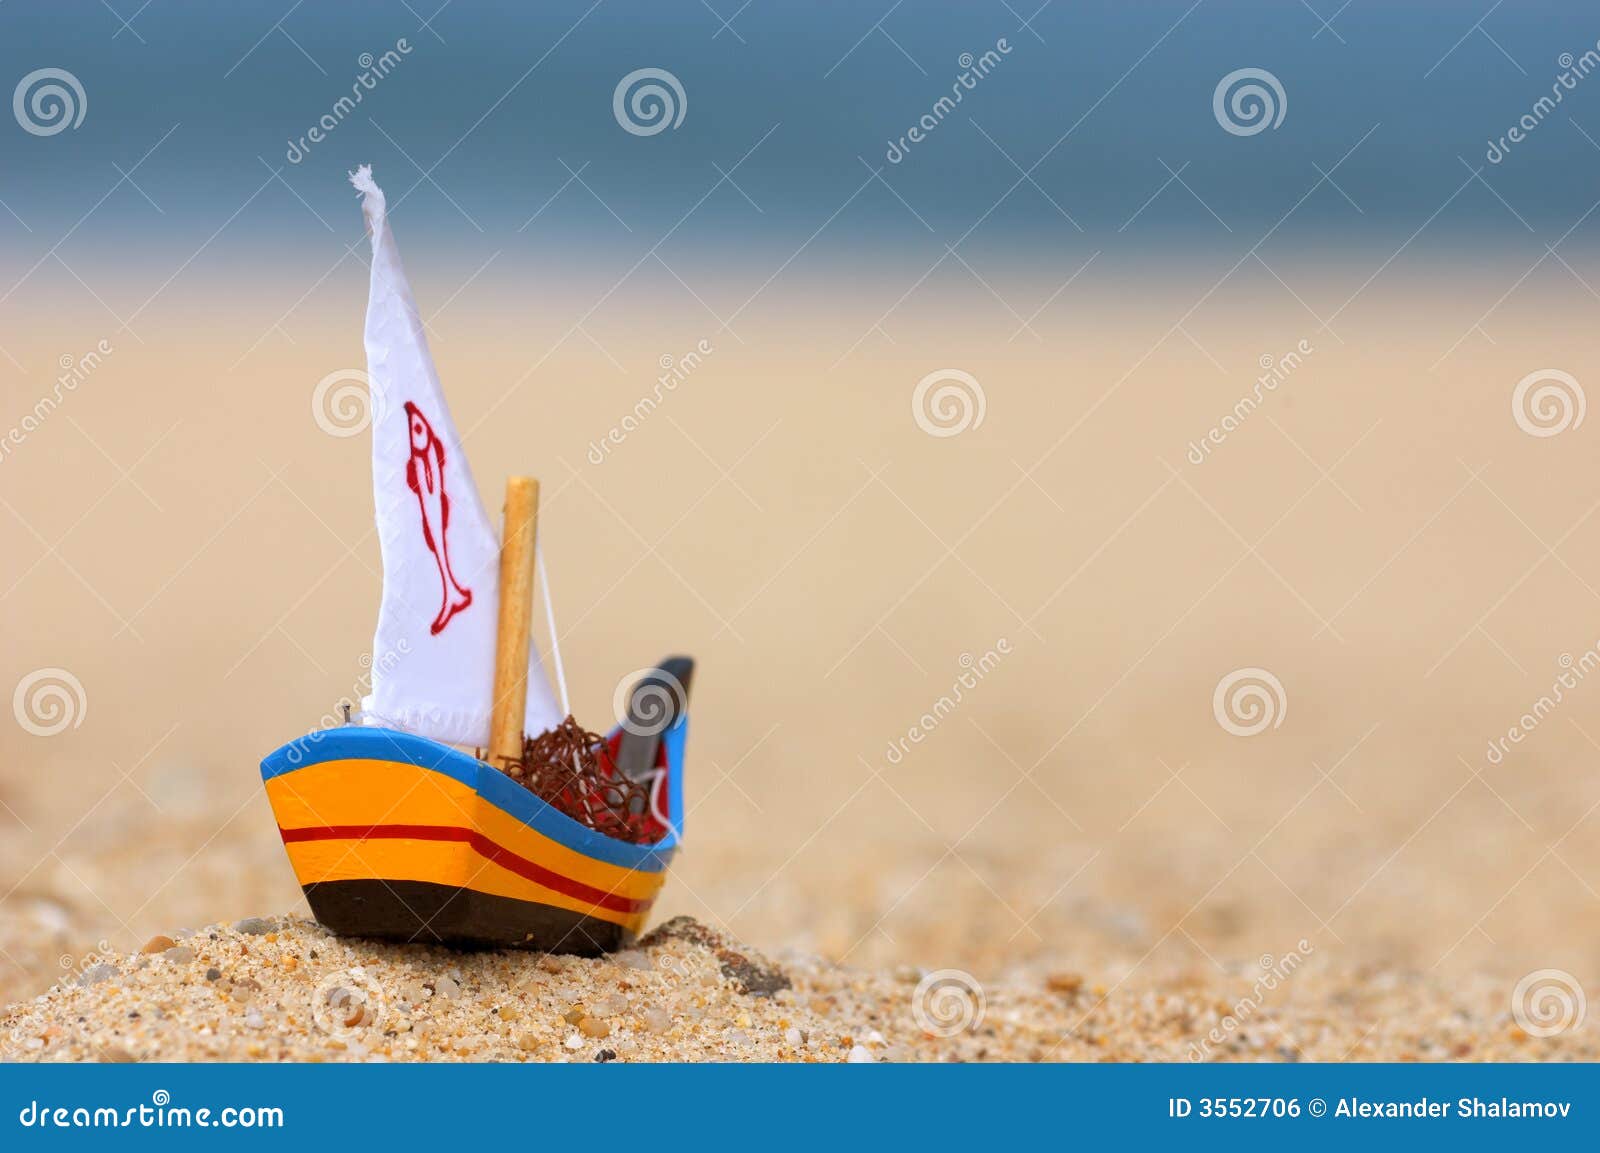 Small Wooden Fishing Boat Toy Stock Photo - Image of sand, beach: 3552706